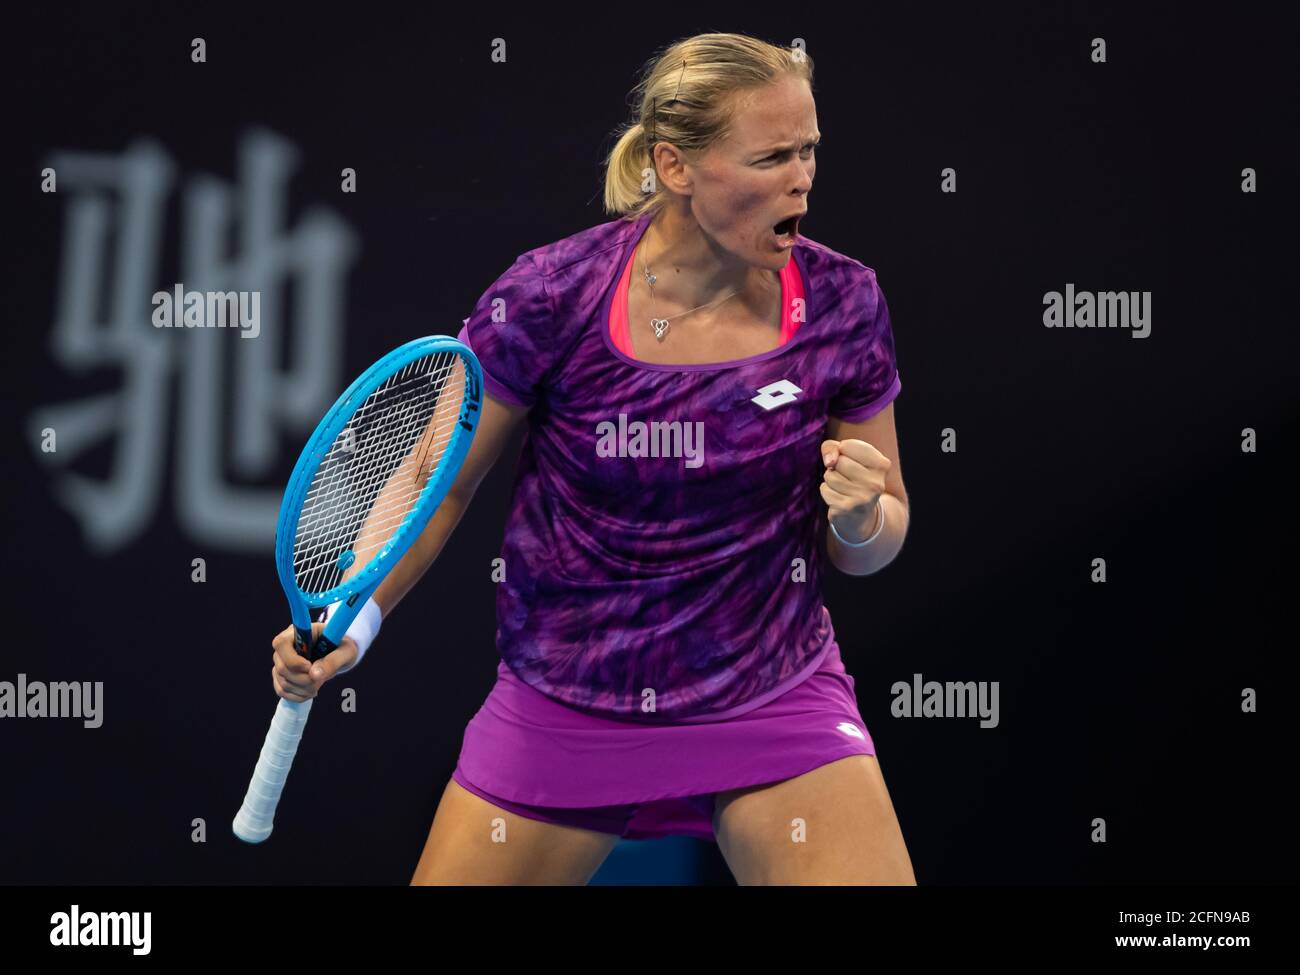 Anna-Lena Groenefeld of Germany playing doubles at the 2019 China Open Premier Mandatory tennis tournament Stock Photo